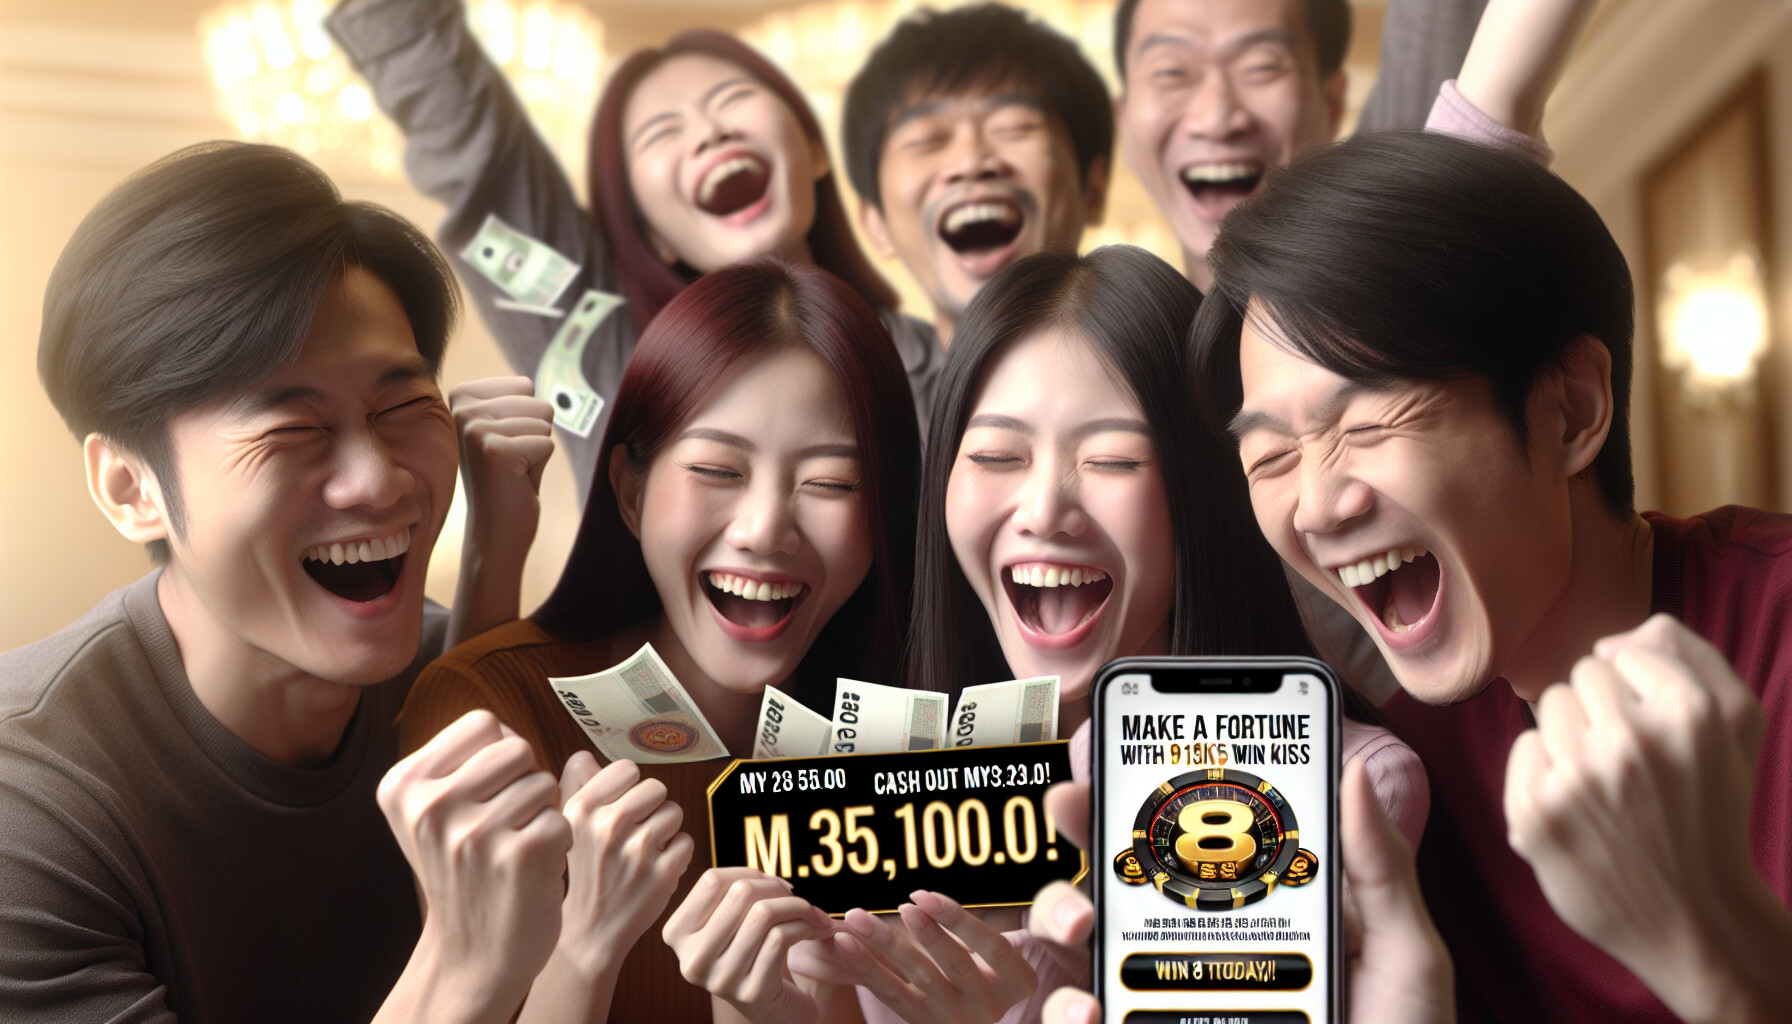 Experience the ultimate thrill and win big with 918kiss! Dive into the world of online gaming and turn MYR 250 into MYR 5,200! 🎰💰 #918kiss #onlinegaming